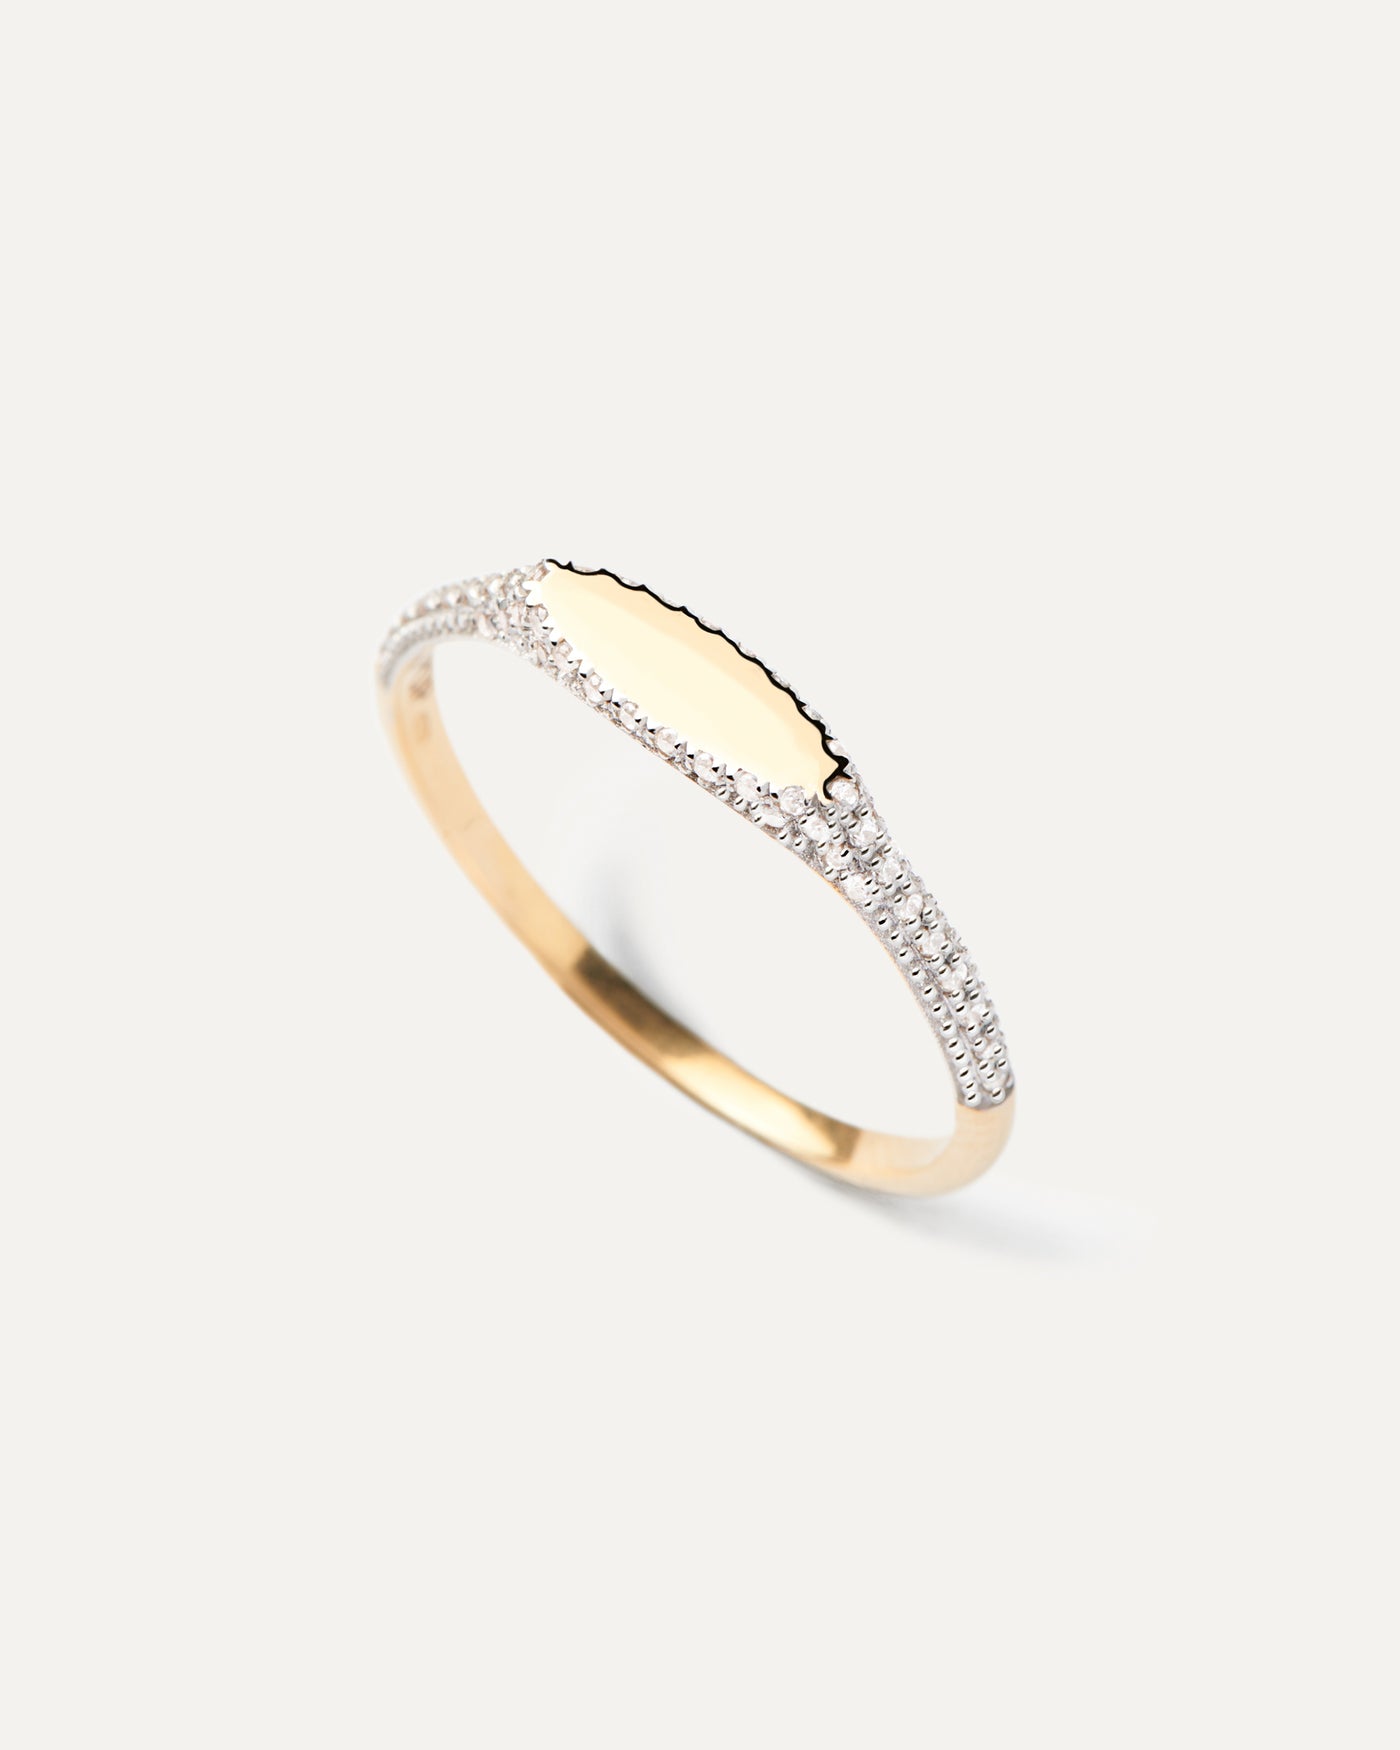 2023 Selection | Diamonds and Gold Tess Stamp Ring. Slim signet ring in solid 18K yellow gold set with pavé diamonds of 0.15 carats . Get the latest arrival from PDPAOLA. Place your order safely and get this Best Seller. Free Shipping.